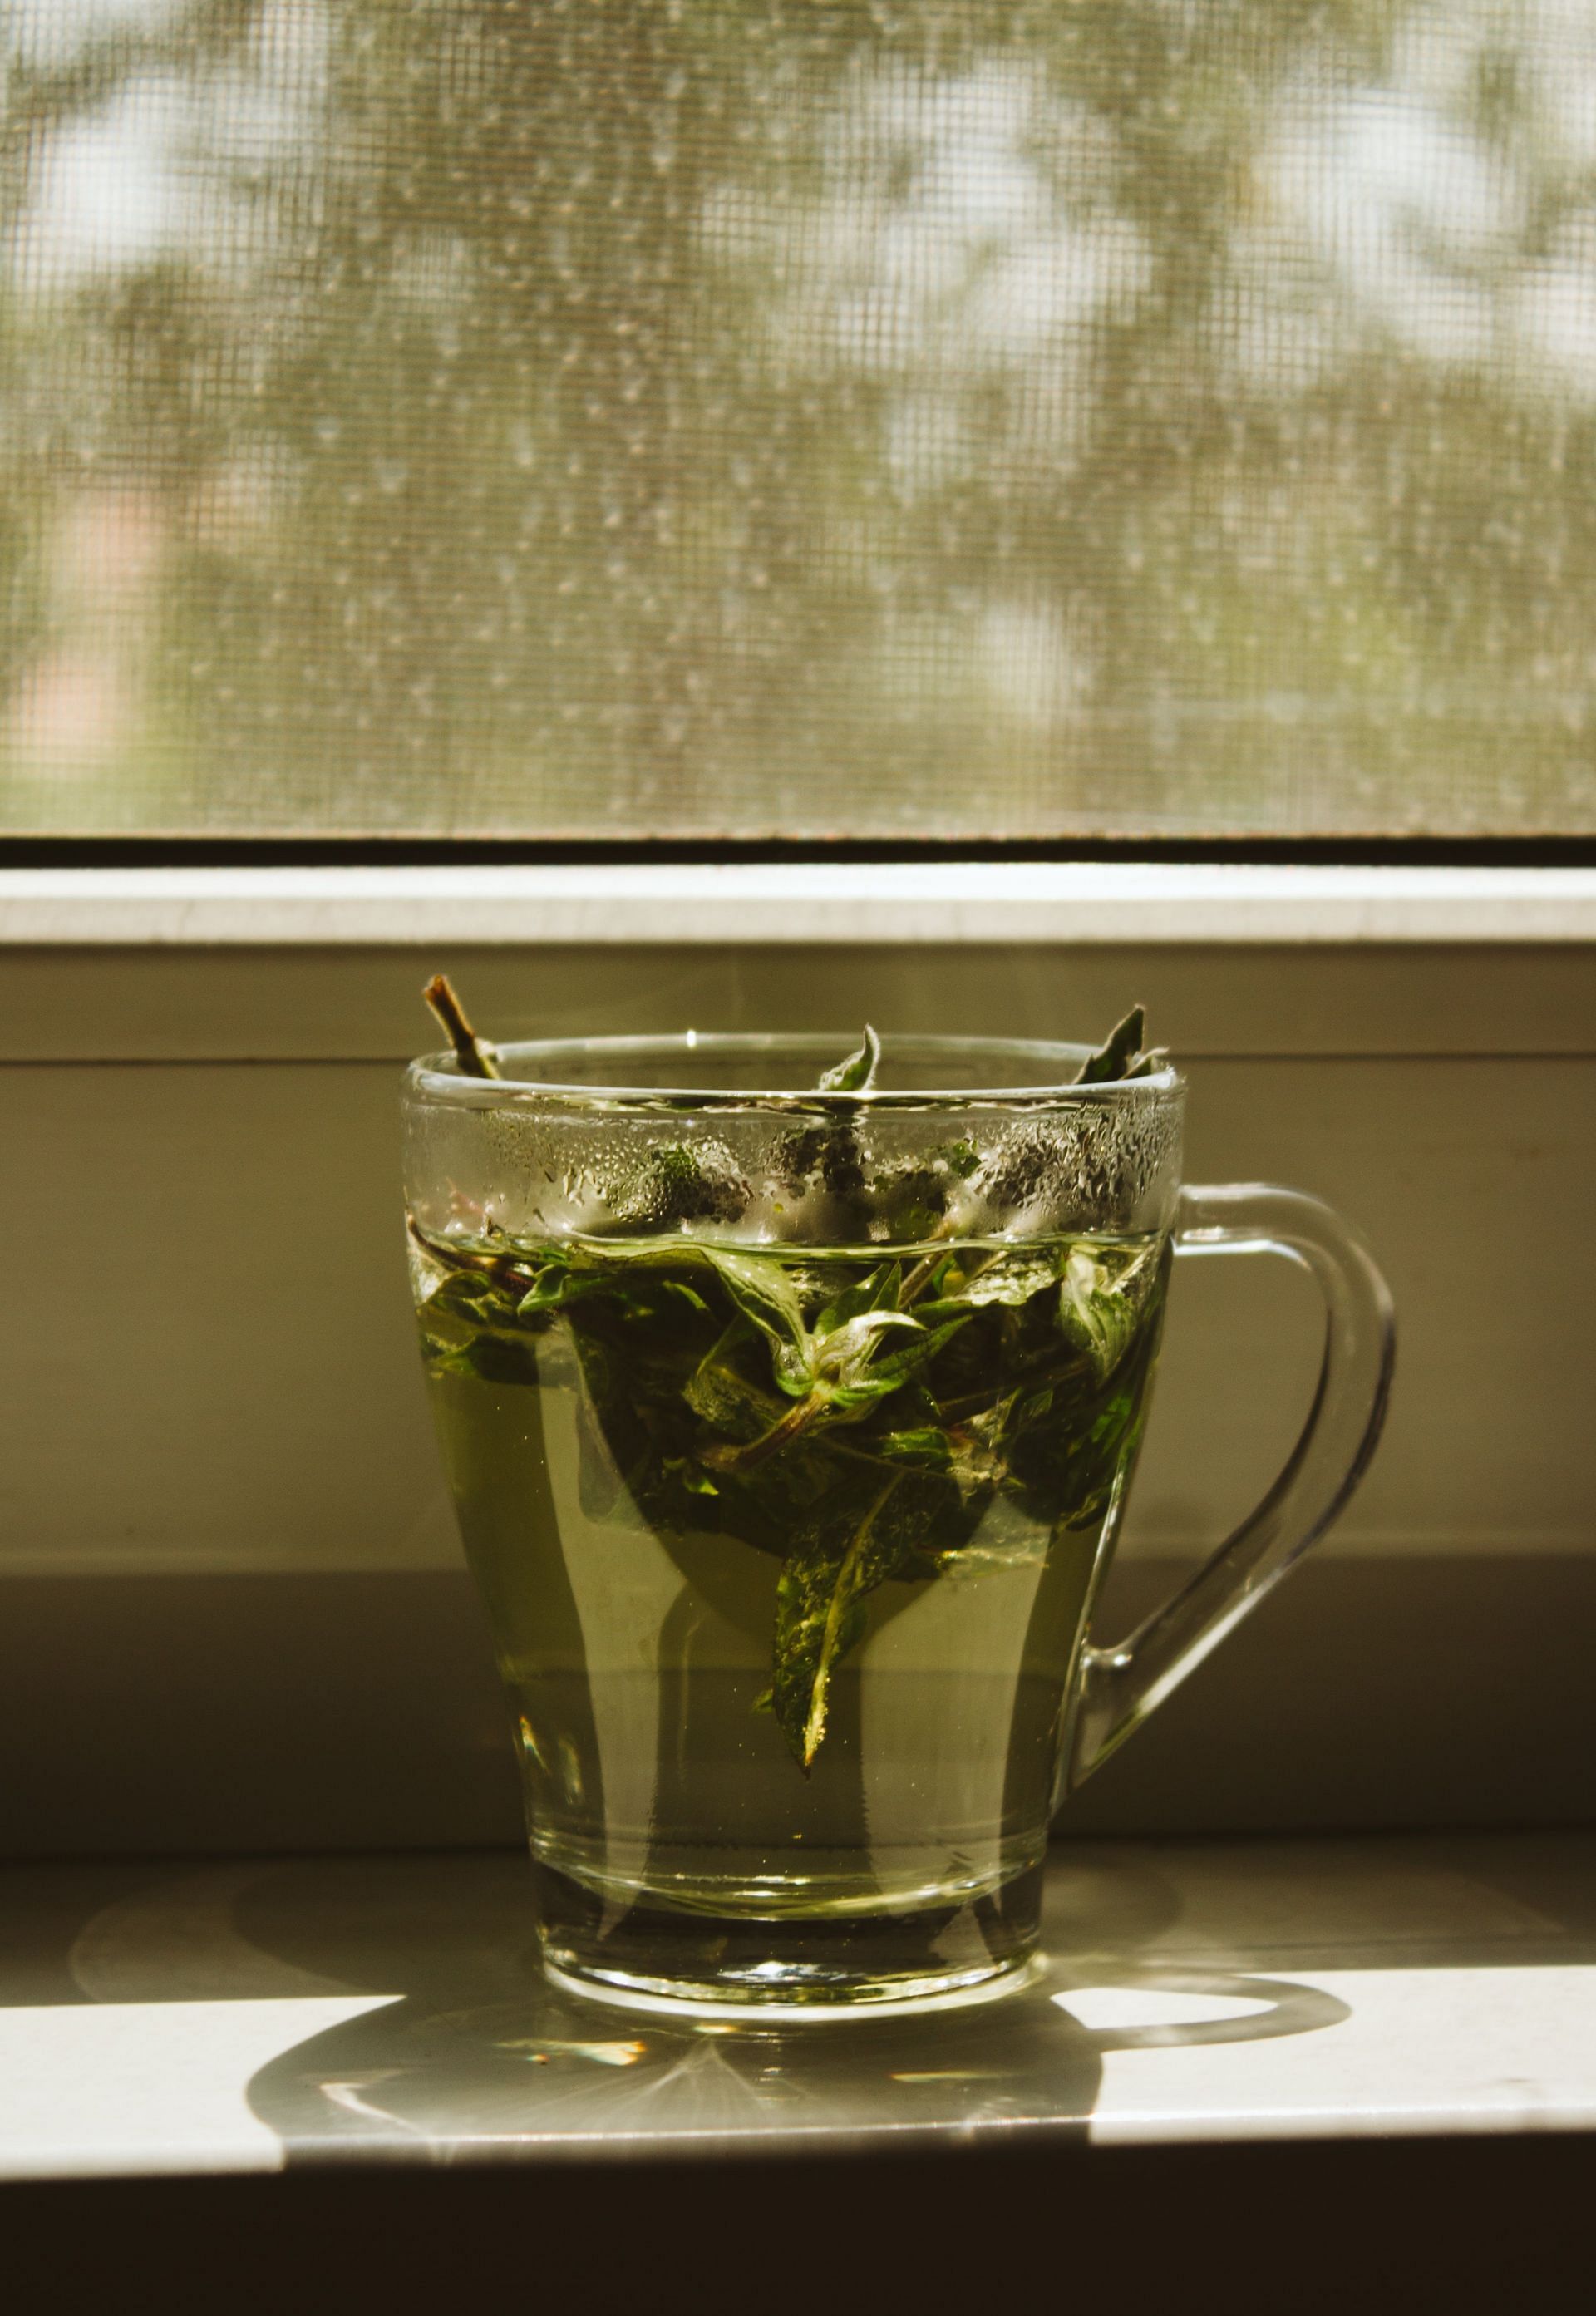 Green tea is effective in reducing the appearance of fine lines and wrinkles (Image via Unsplash)